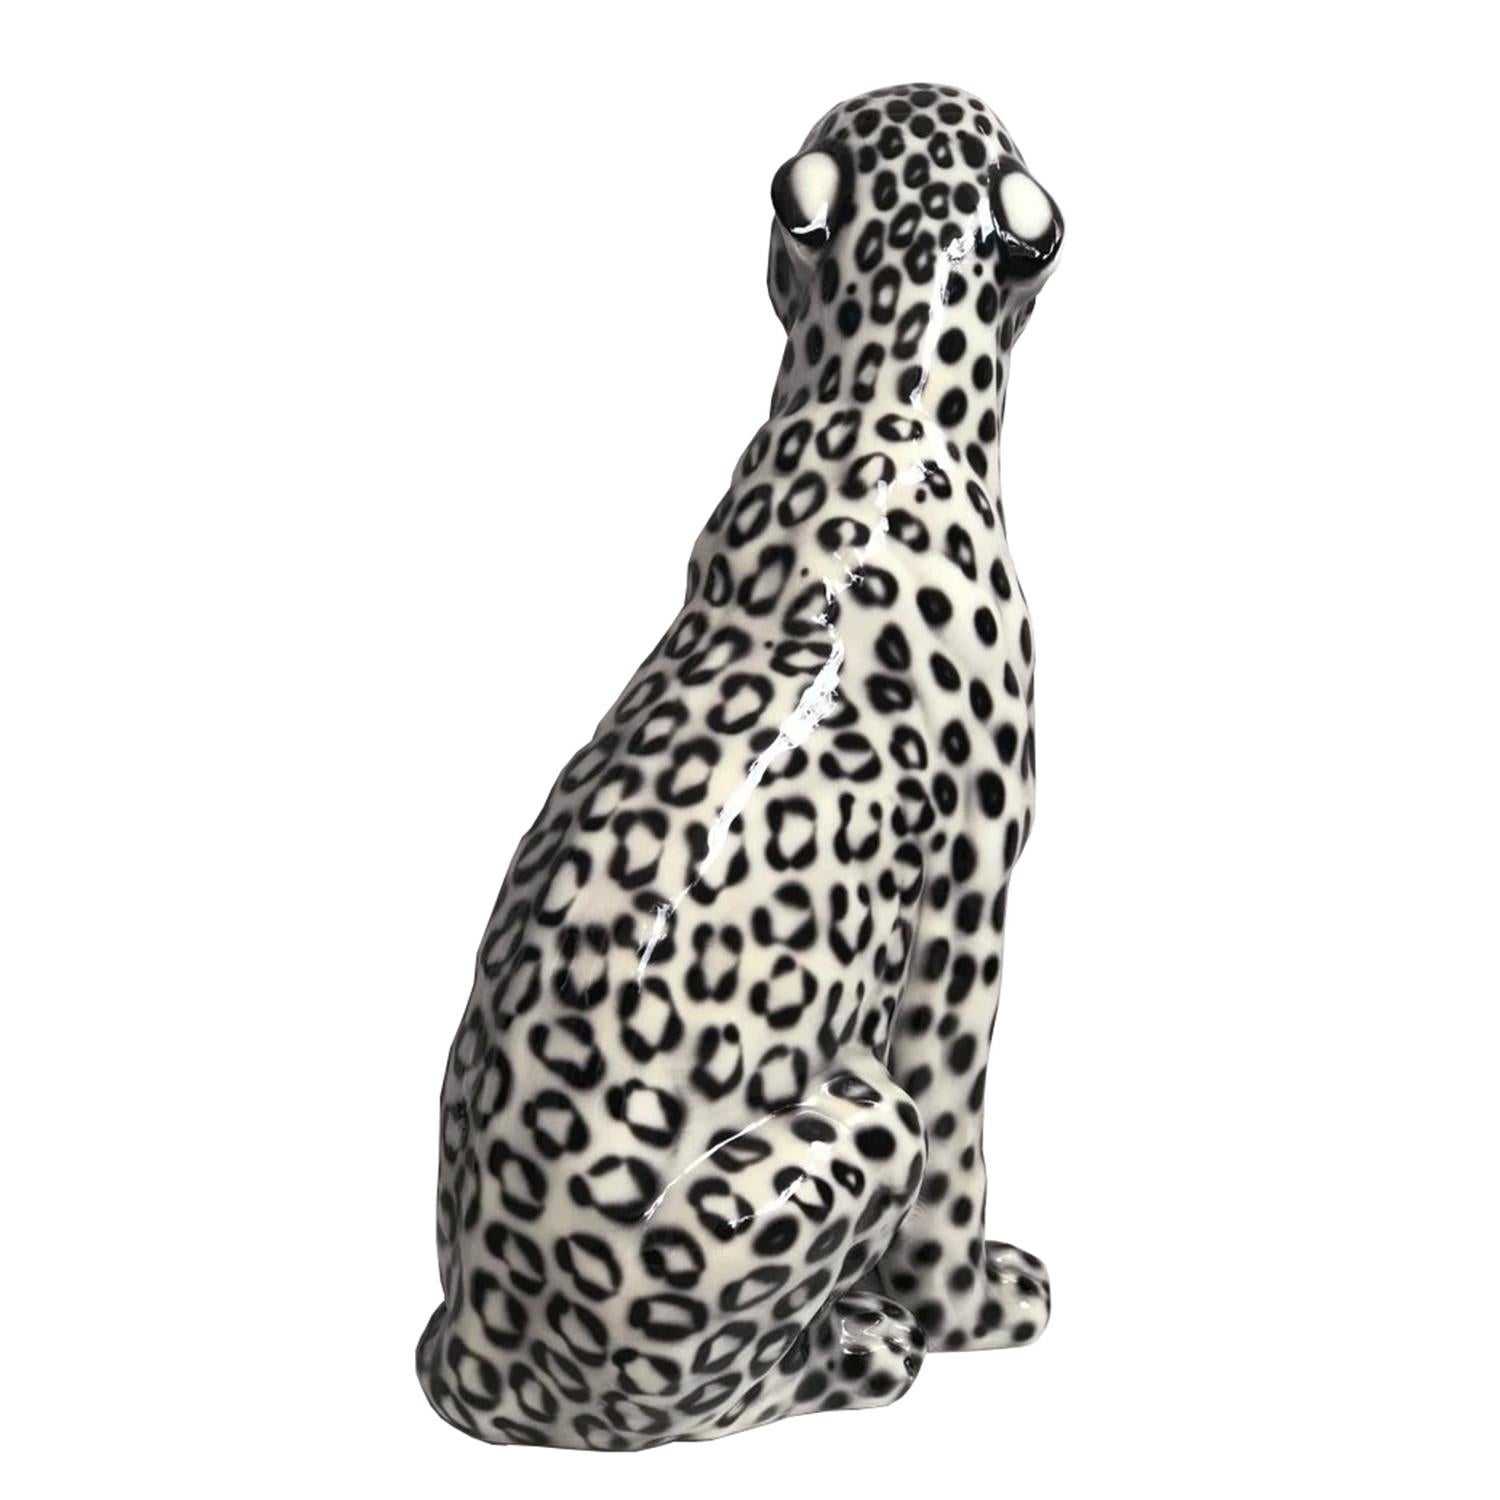 Italian Leopard Black and White Right Sculpture For Sale